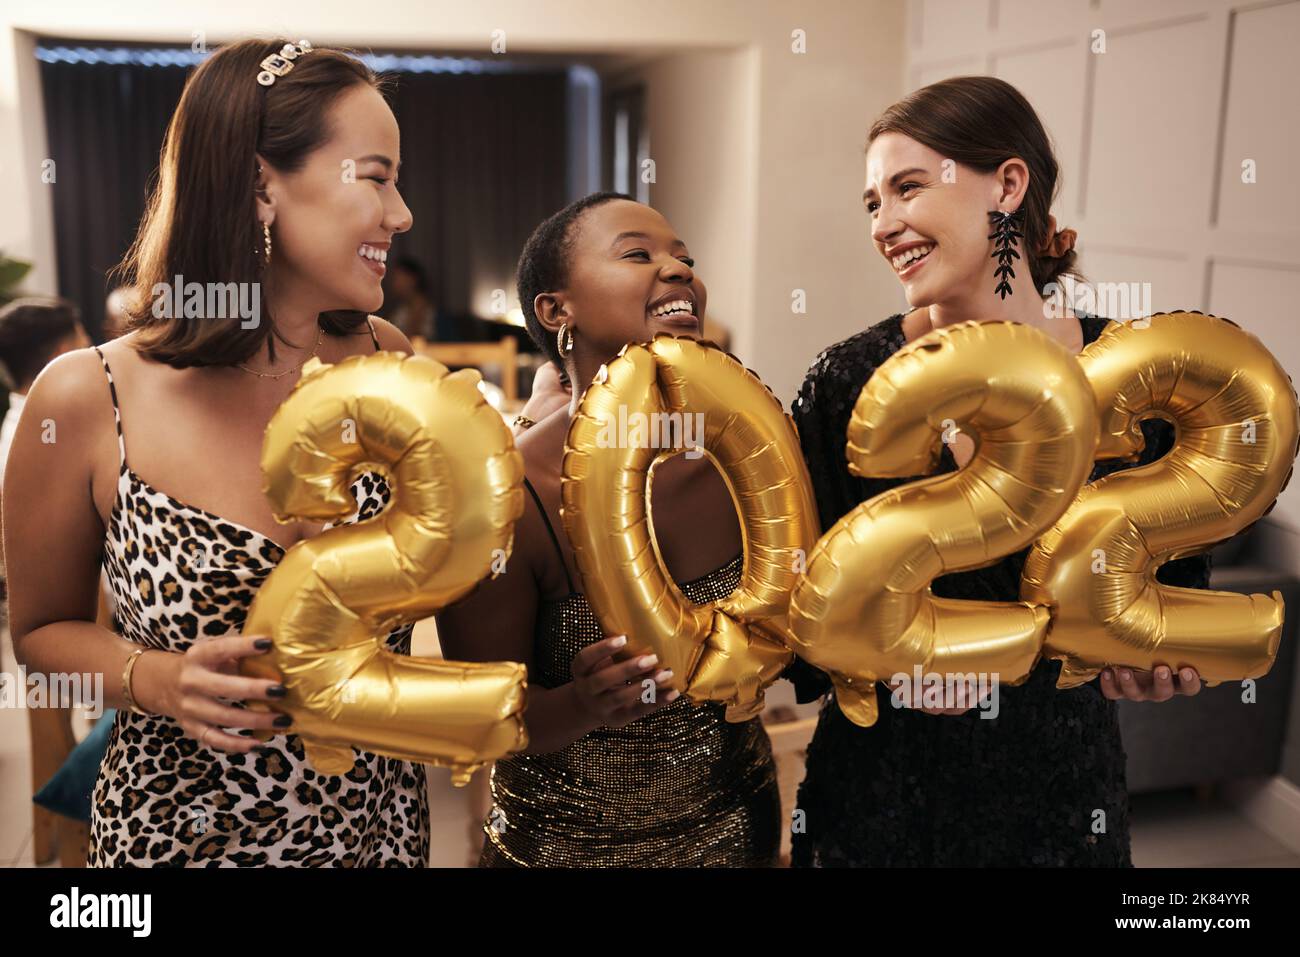 Were ready for the New Year. a diverse group of friends standing together and holding 2022 balloons during a New Years dinner party. Stock Photo